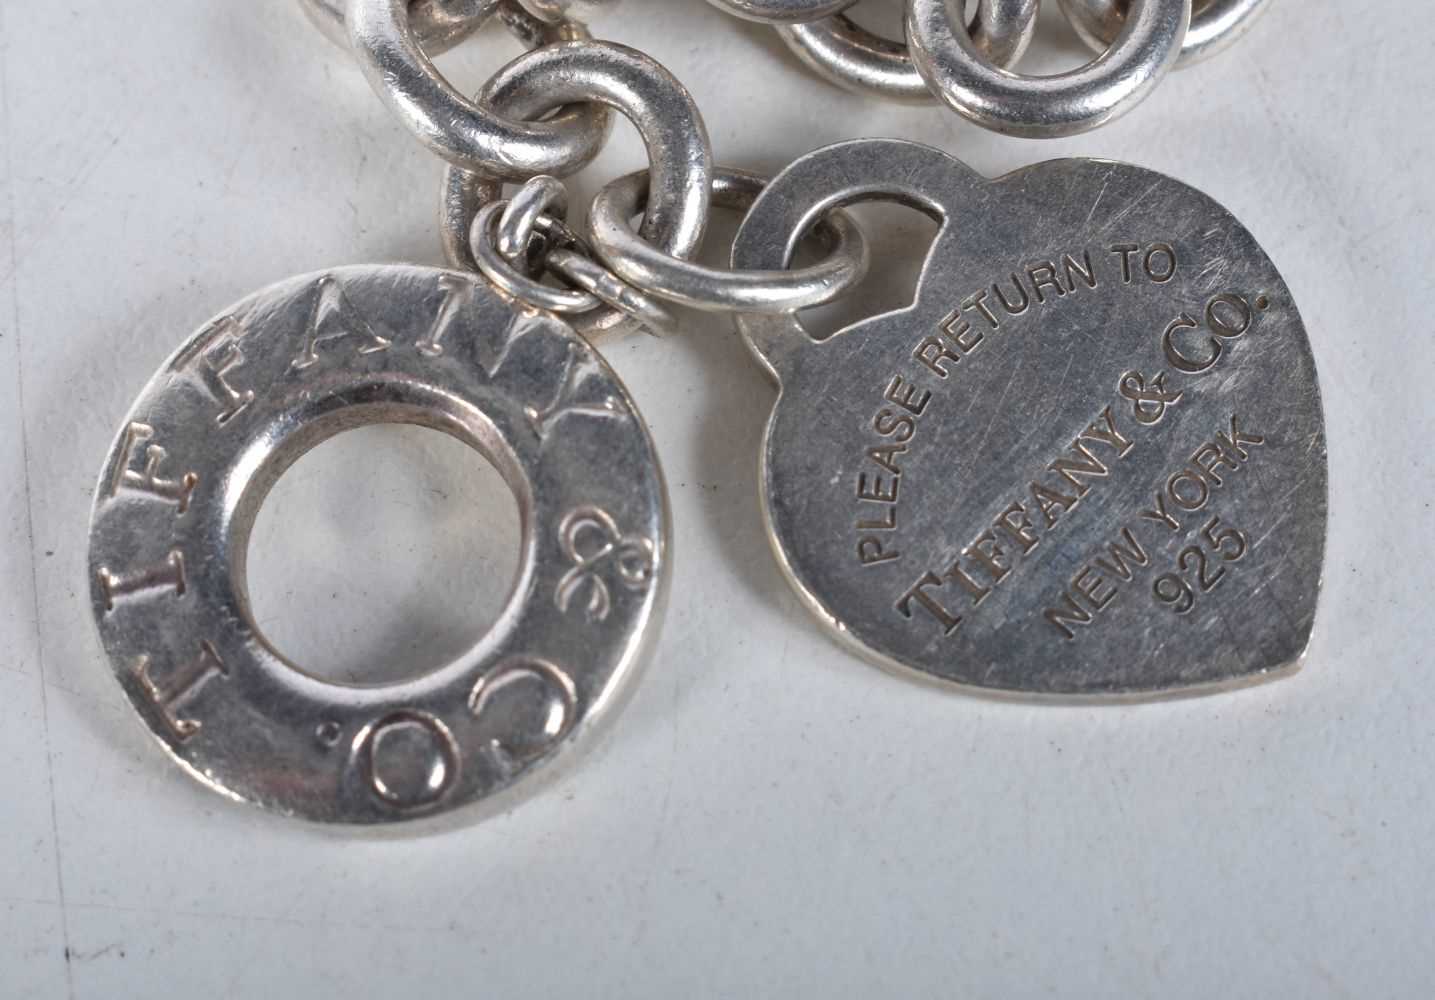 A Tiffany Silver Bracelet with Heart Tag. Stamped Tiffany 925, length 19cm, weight 41g - Image 2 of 3